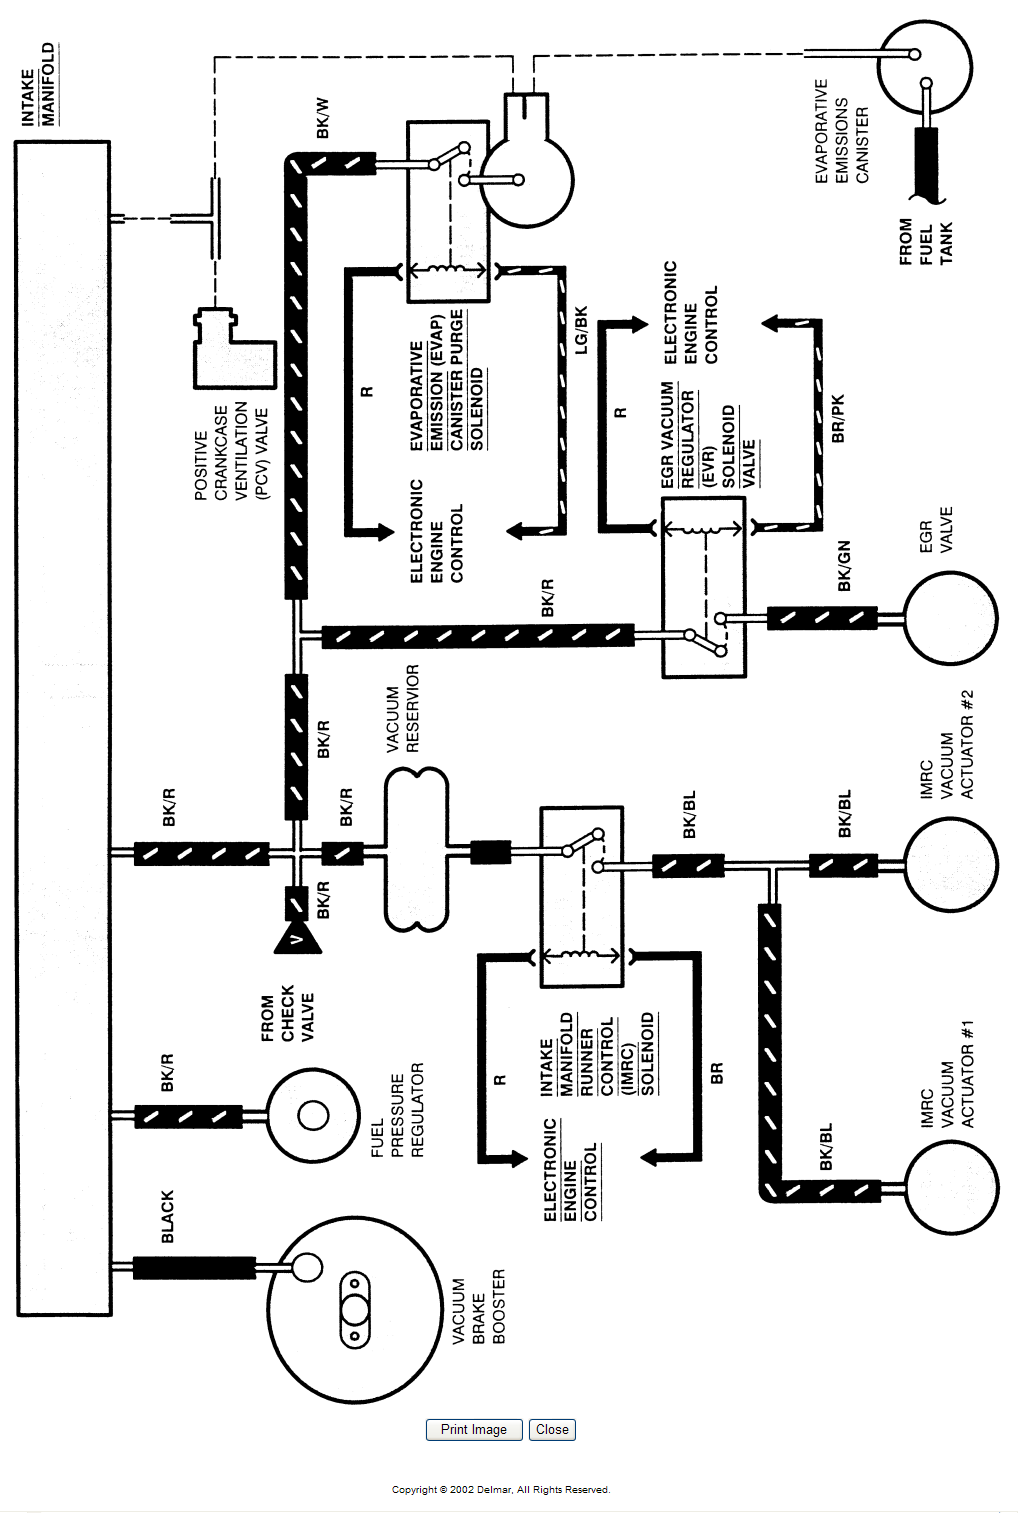 I Need Vacuum Line Diagrams For The Ford Windstar:95.